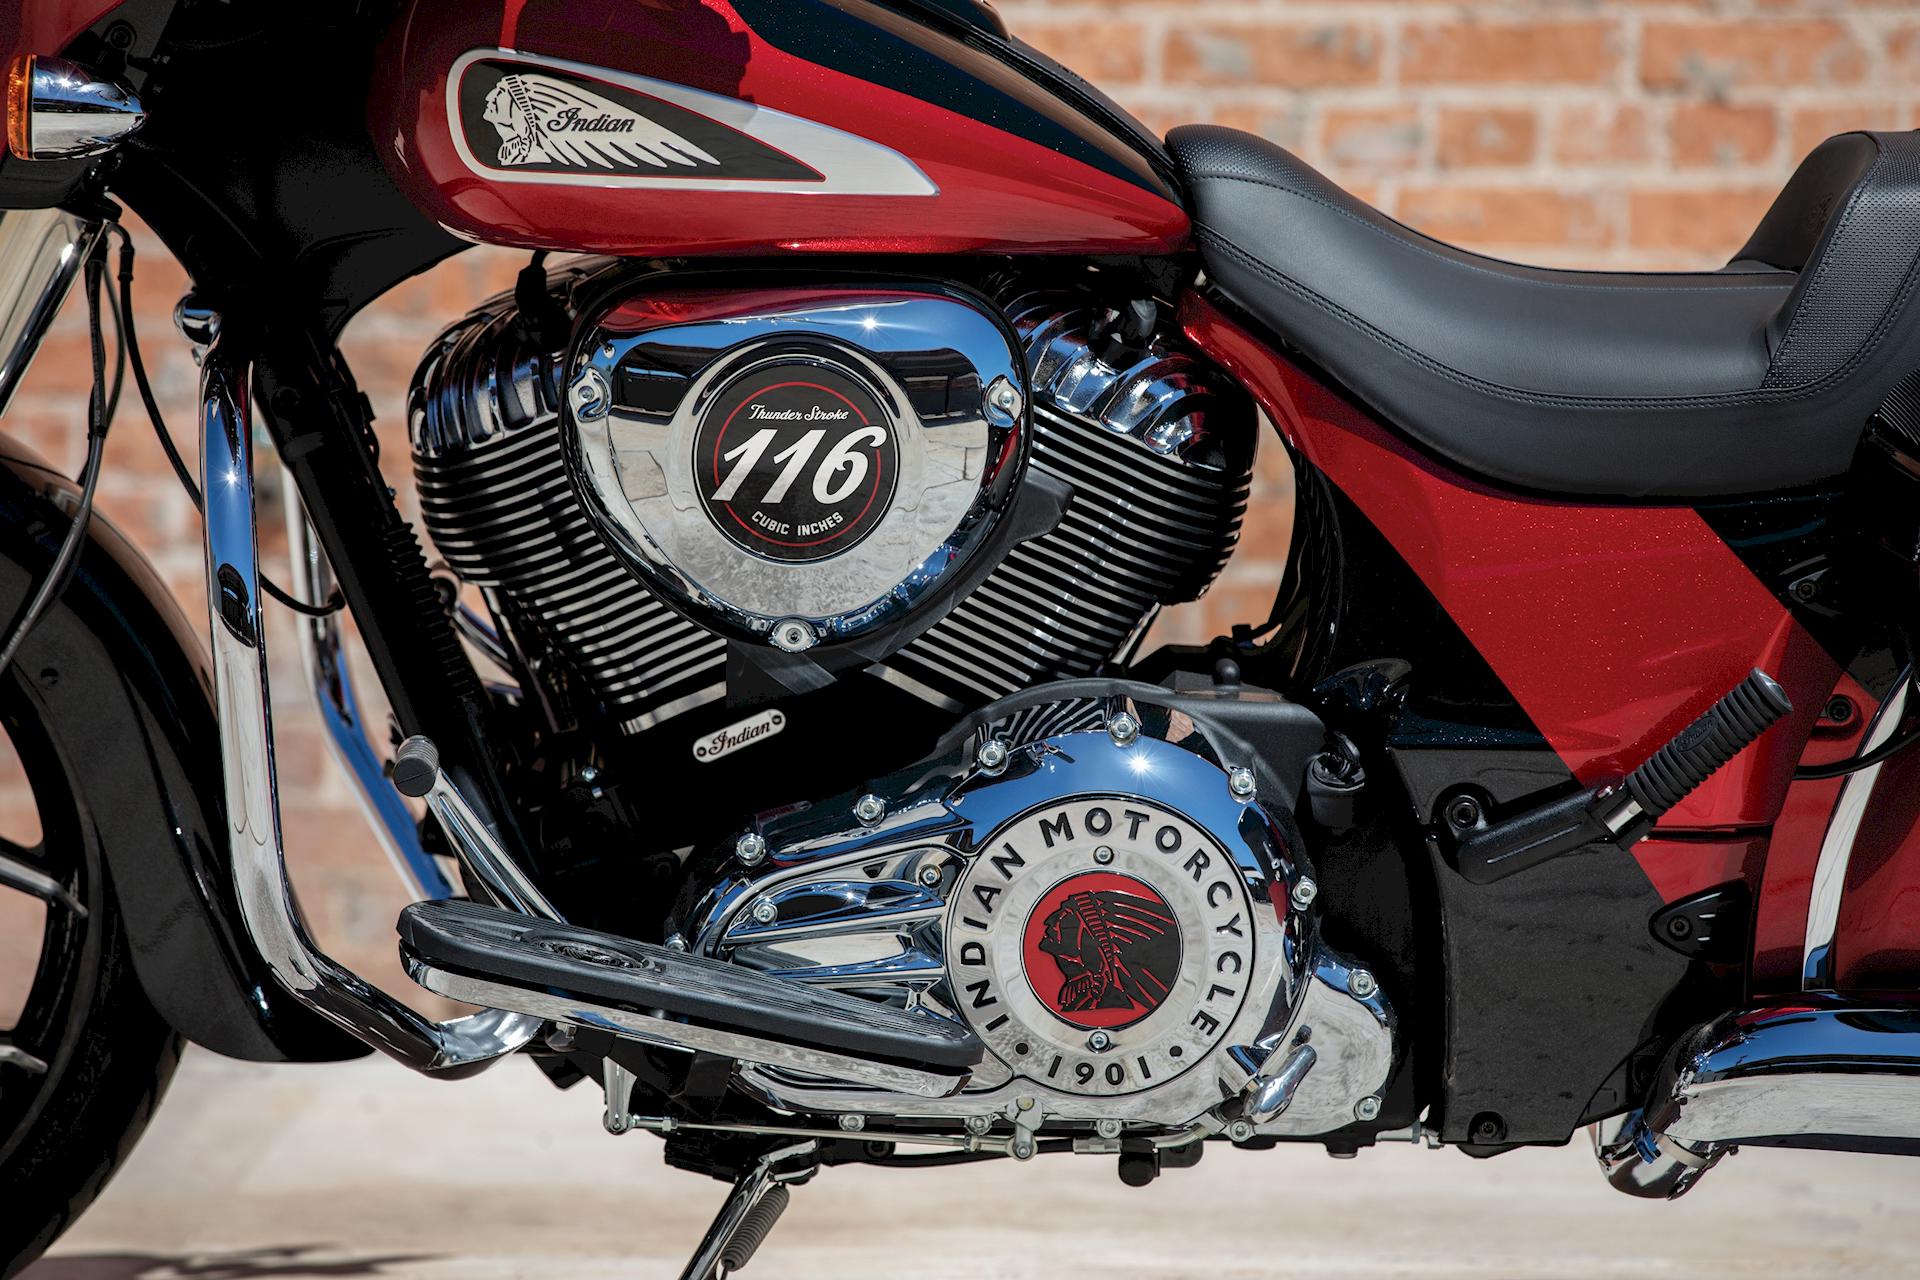 Indian Chieftain Elite 2020 Thunder Stroke 116 Thunder Black Vivid Crystal-Wildfire Red Candy